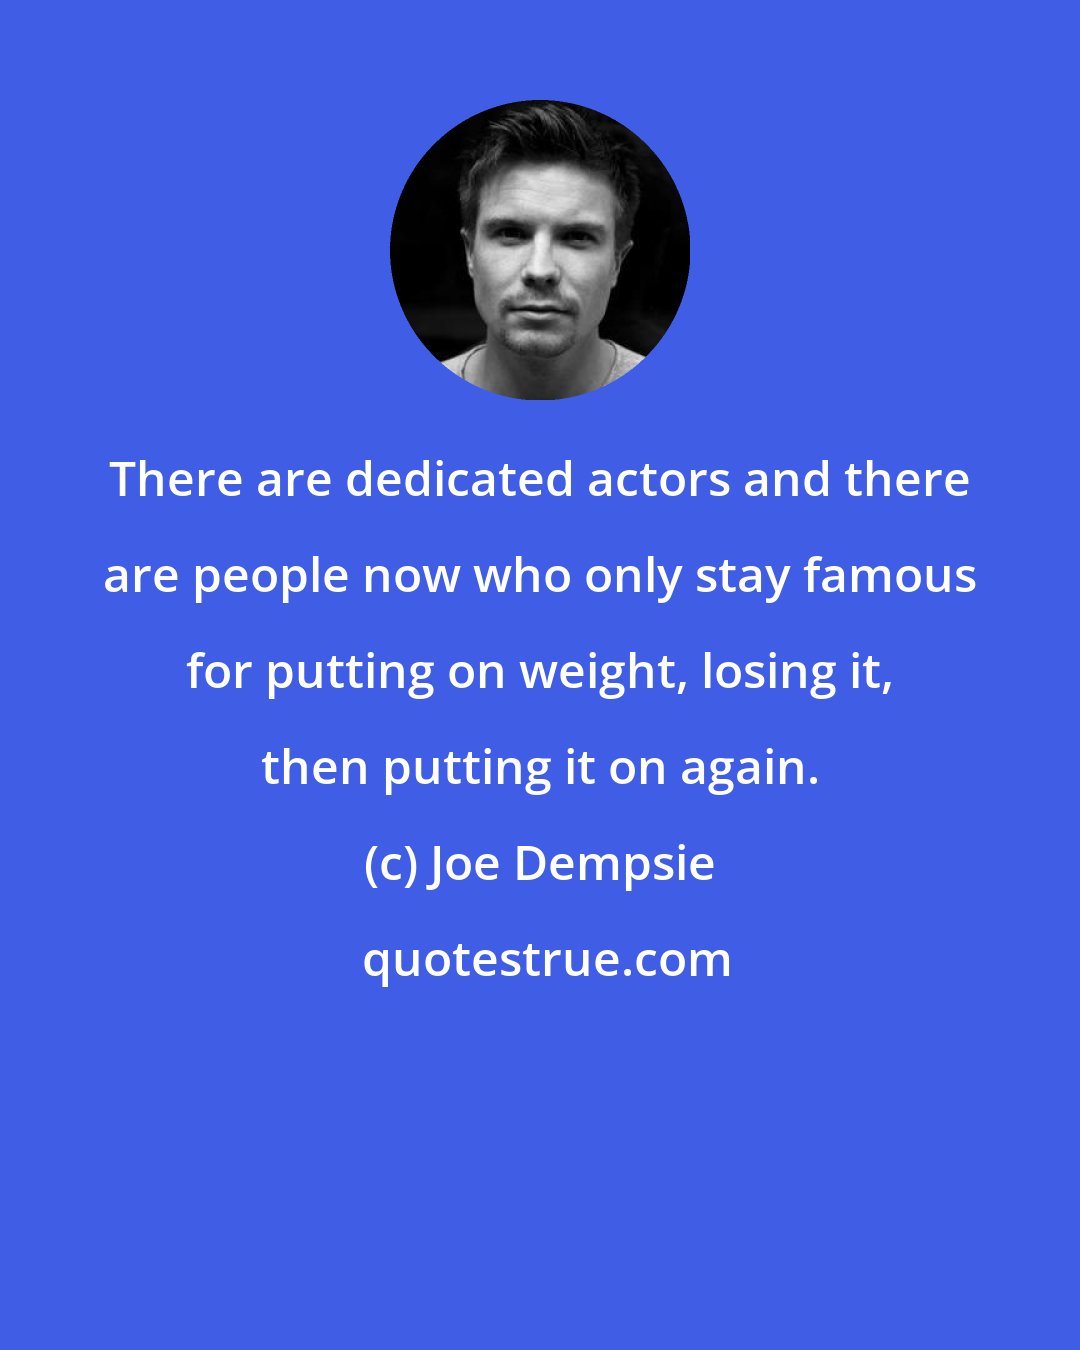 Joe Dempsie: There are dedicated actors and there are people now who only stay famous for putting on weight, losing it, then putting it on again.